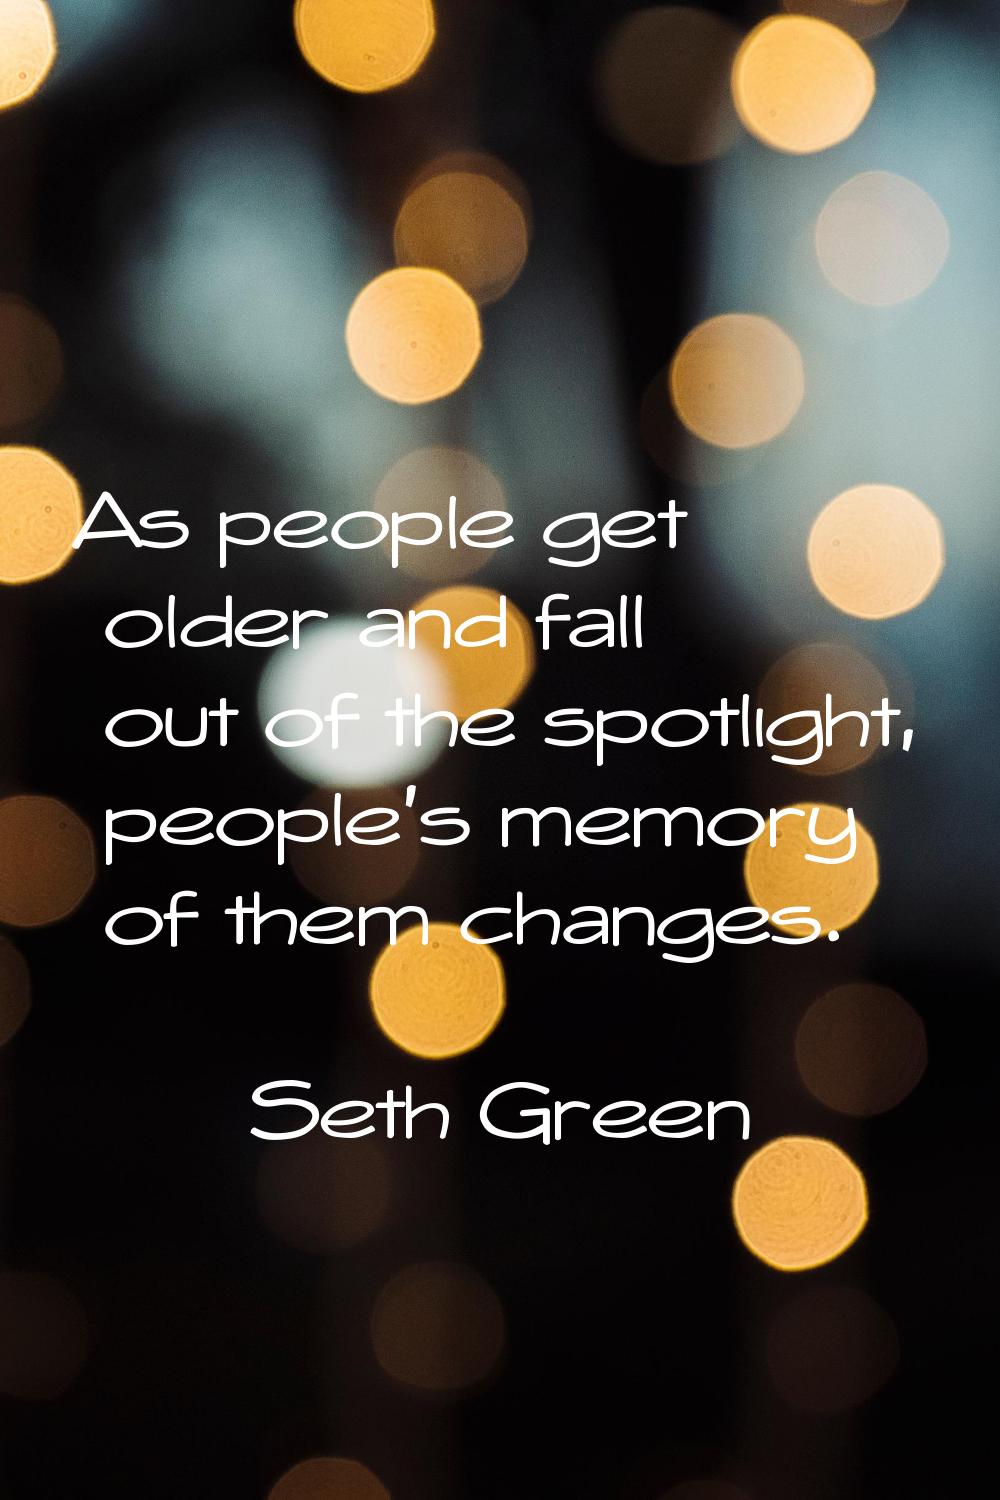 As people get older and fall out of the spotlight, people's memory of them changes.